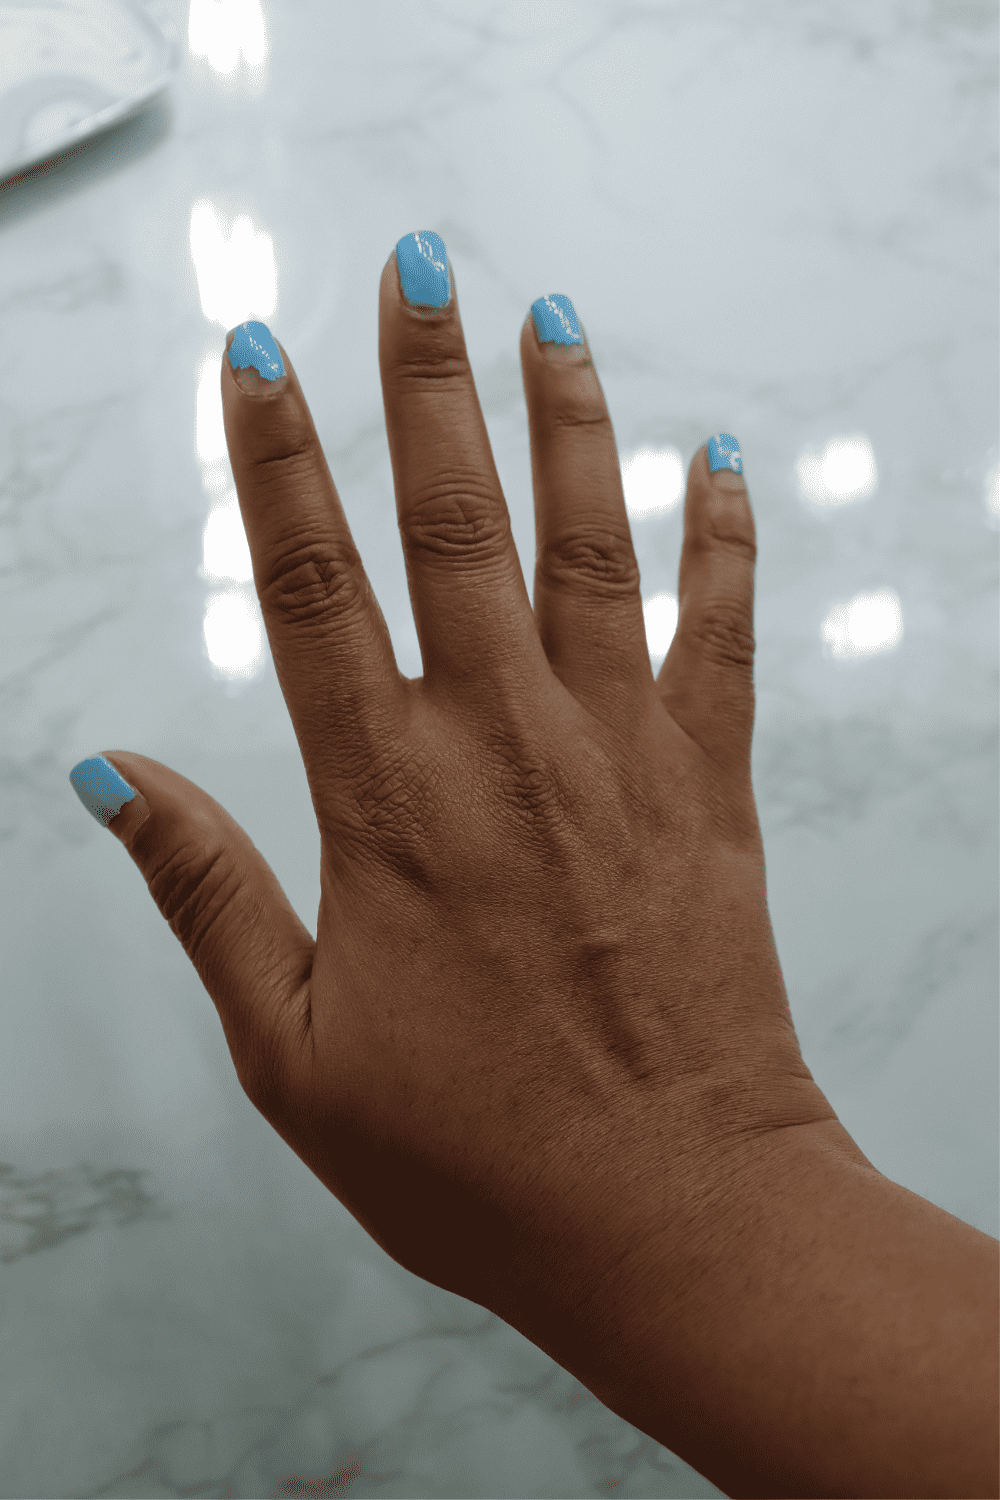 How to Remove Gel Nail Polish Without Soaking or Peeling